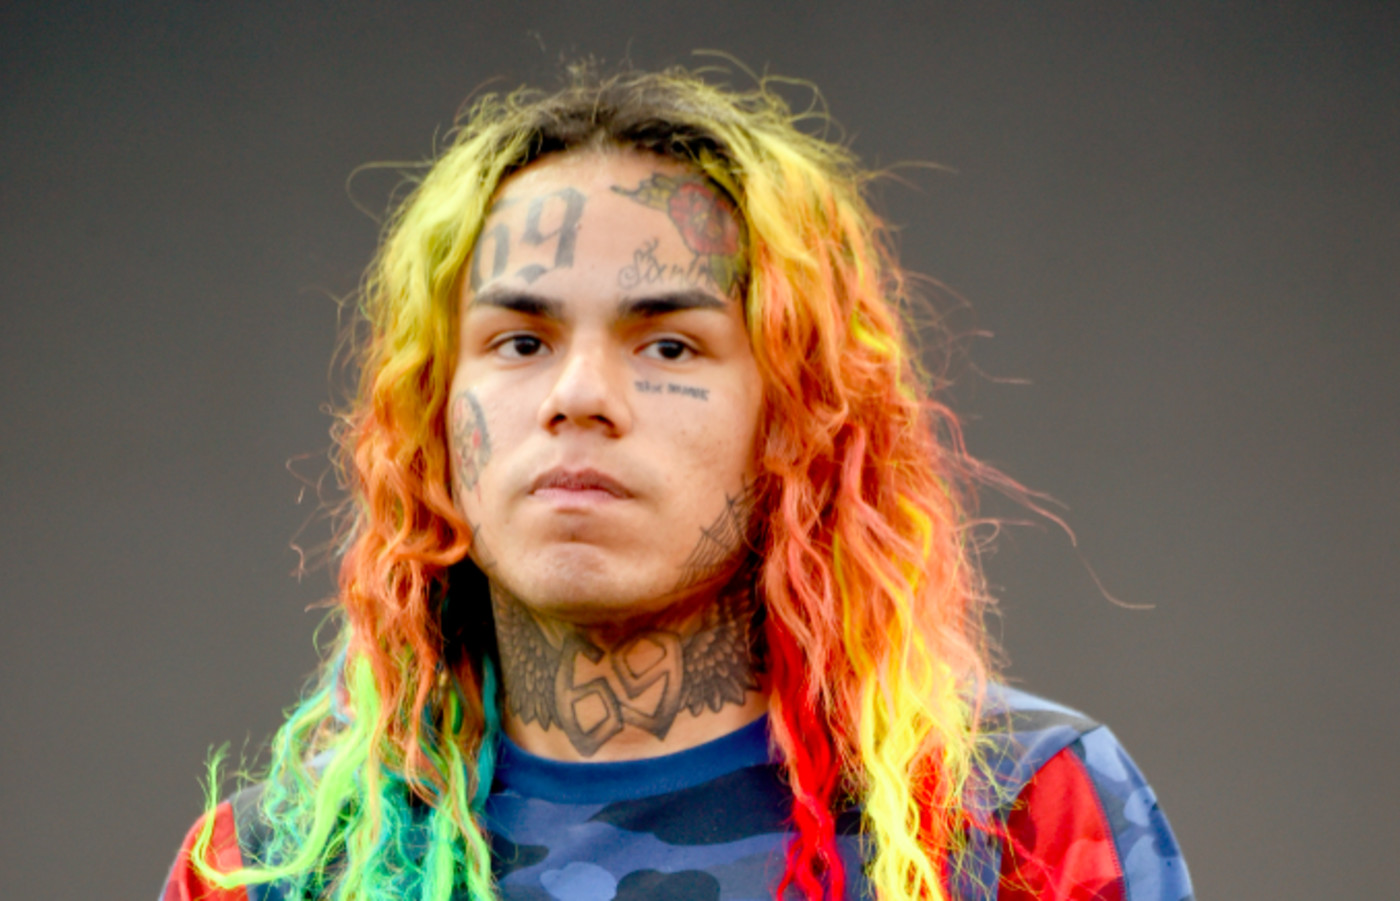 6ix9ine S Girlfriend And Mother Of Daughter Trade Shots On